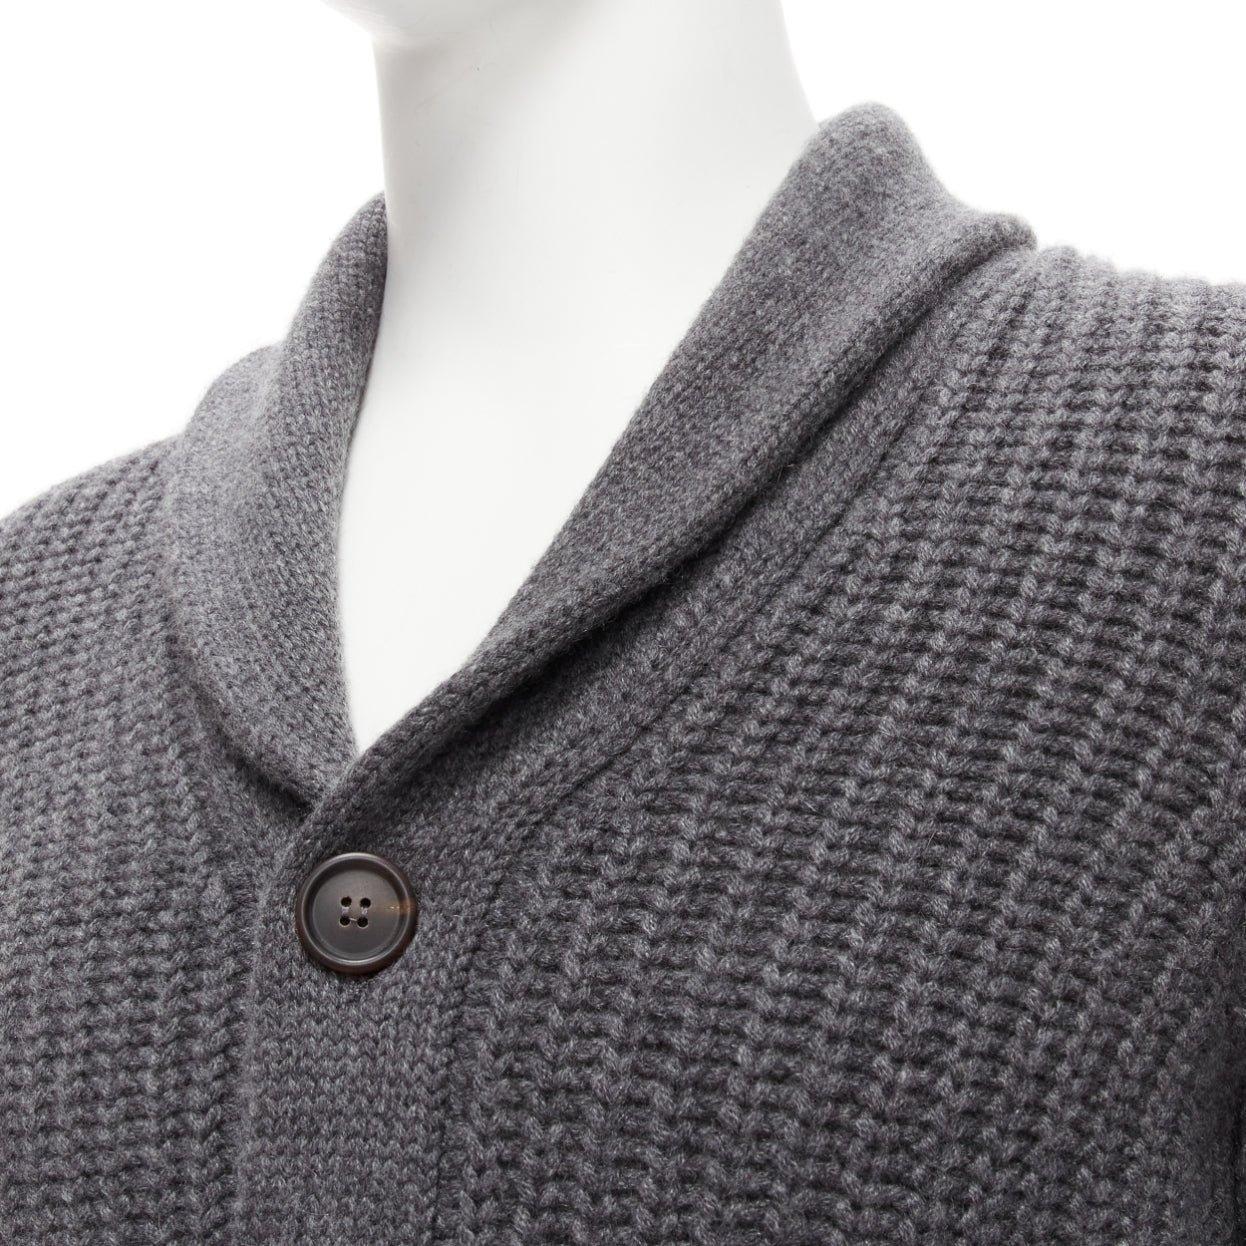 BRUNELLO CUCINELLI 100% cashmere grey shawl collar ribbed cardigan swater EU38 S
Reference: TGAS/D00383
Brand: Brunello Cucinelli
Material: Cashmere
Color: Grey
Pattern: Solid
Closure: Button
Extra Details: 100 cashmere.
Made in: